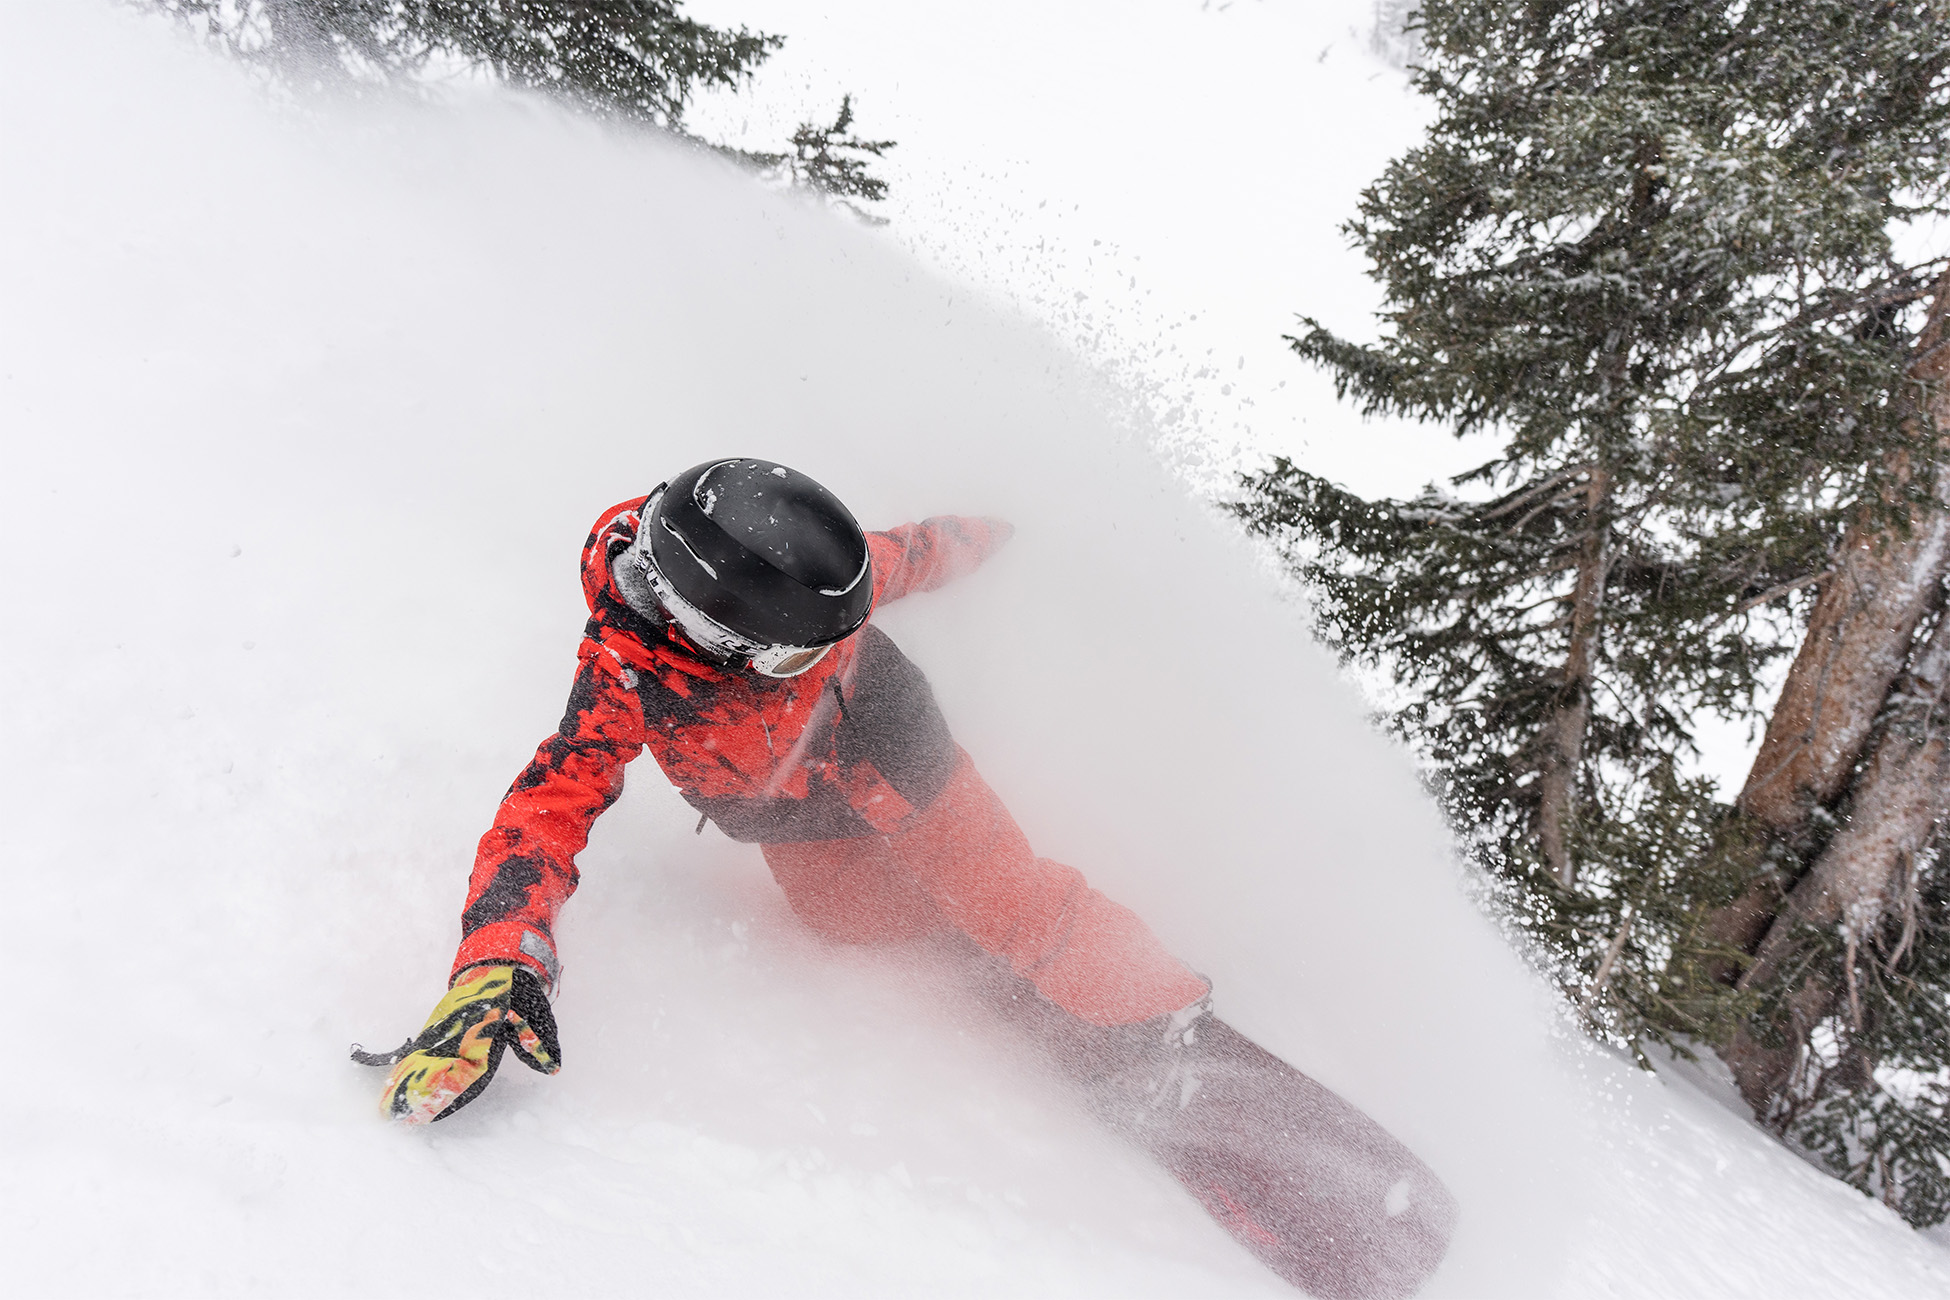 specialty ski and snowboard lessons for teens and youth, Snowbird Utah